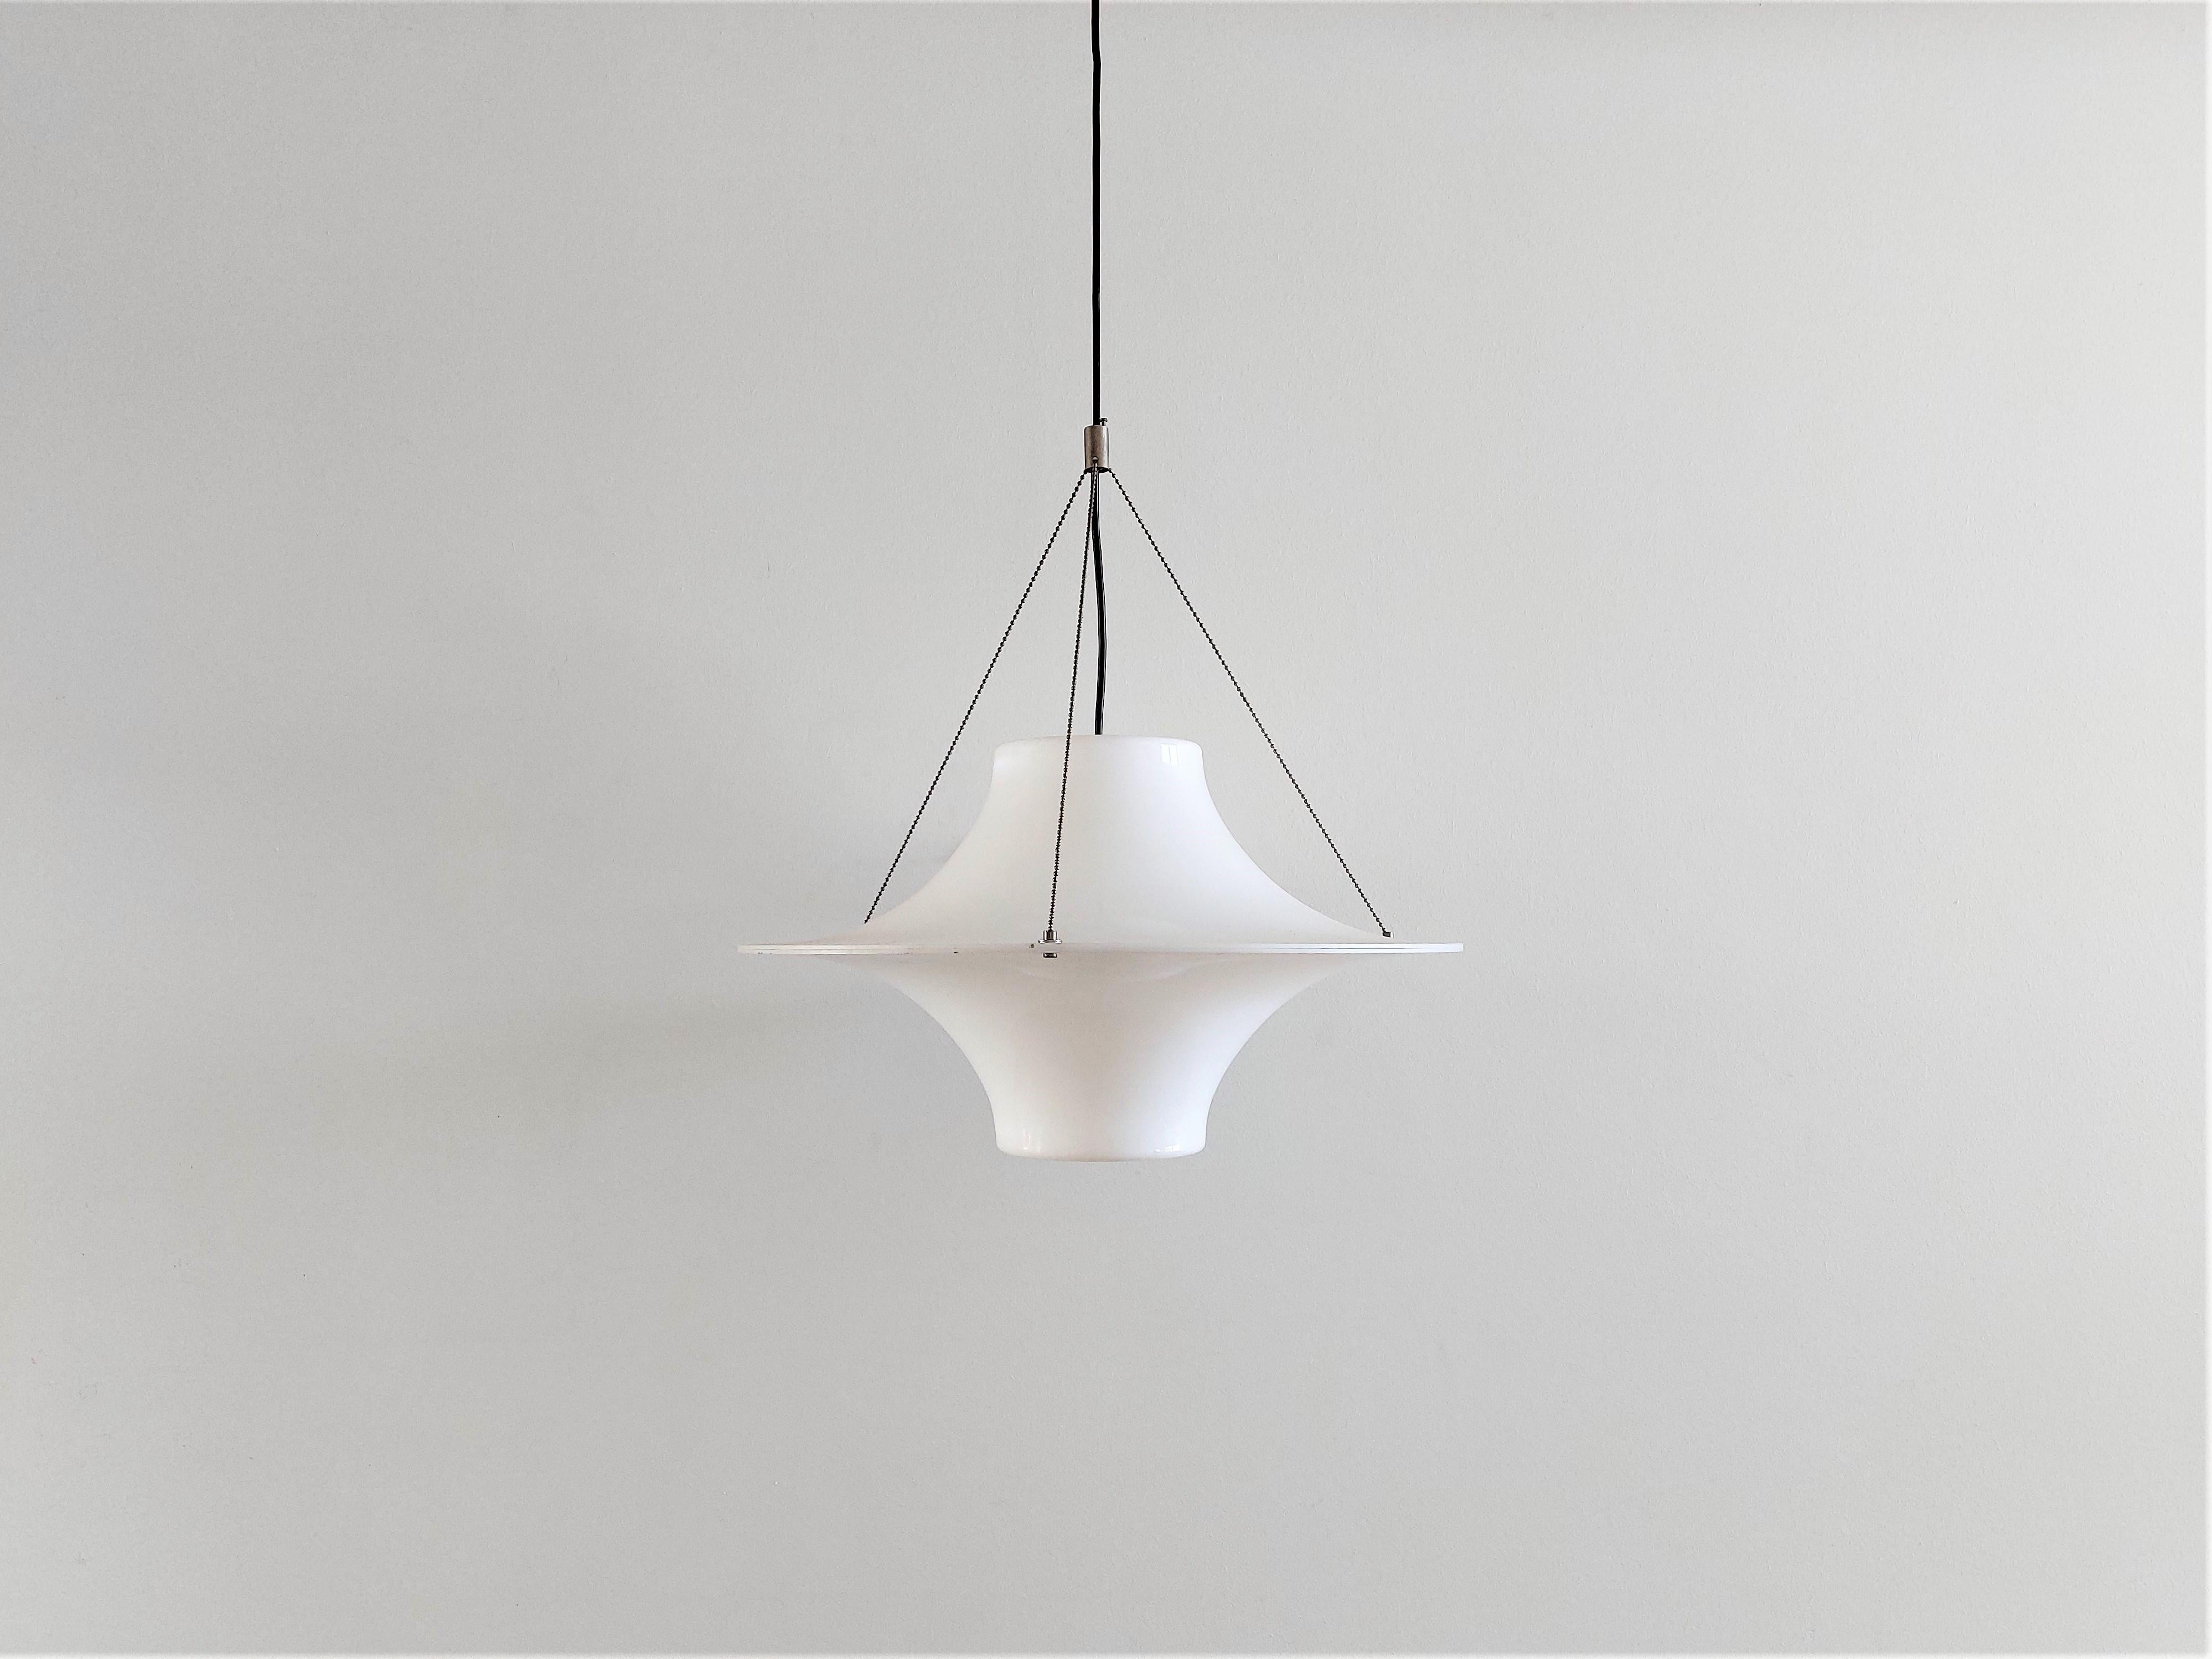 The 'Skyflyer' was designed by Yki Nummi in 1960. Yki Nummi was one of the earlier designers from Finland to use acrylic as a material for light fixtures in the 1960's. The lamp is also known as 'Lokki', that means seagull in Finnish. The shade is